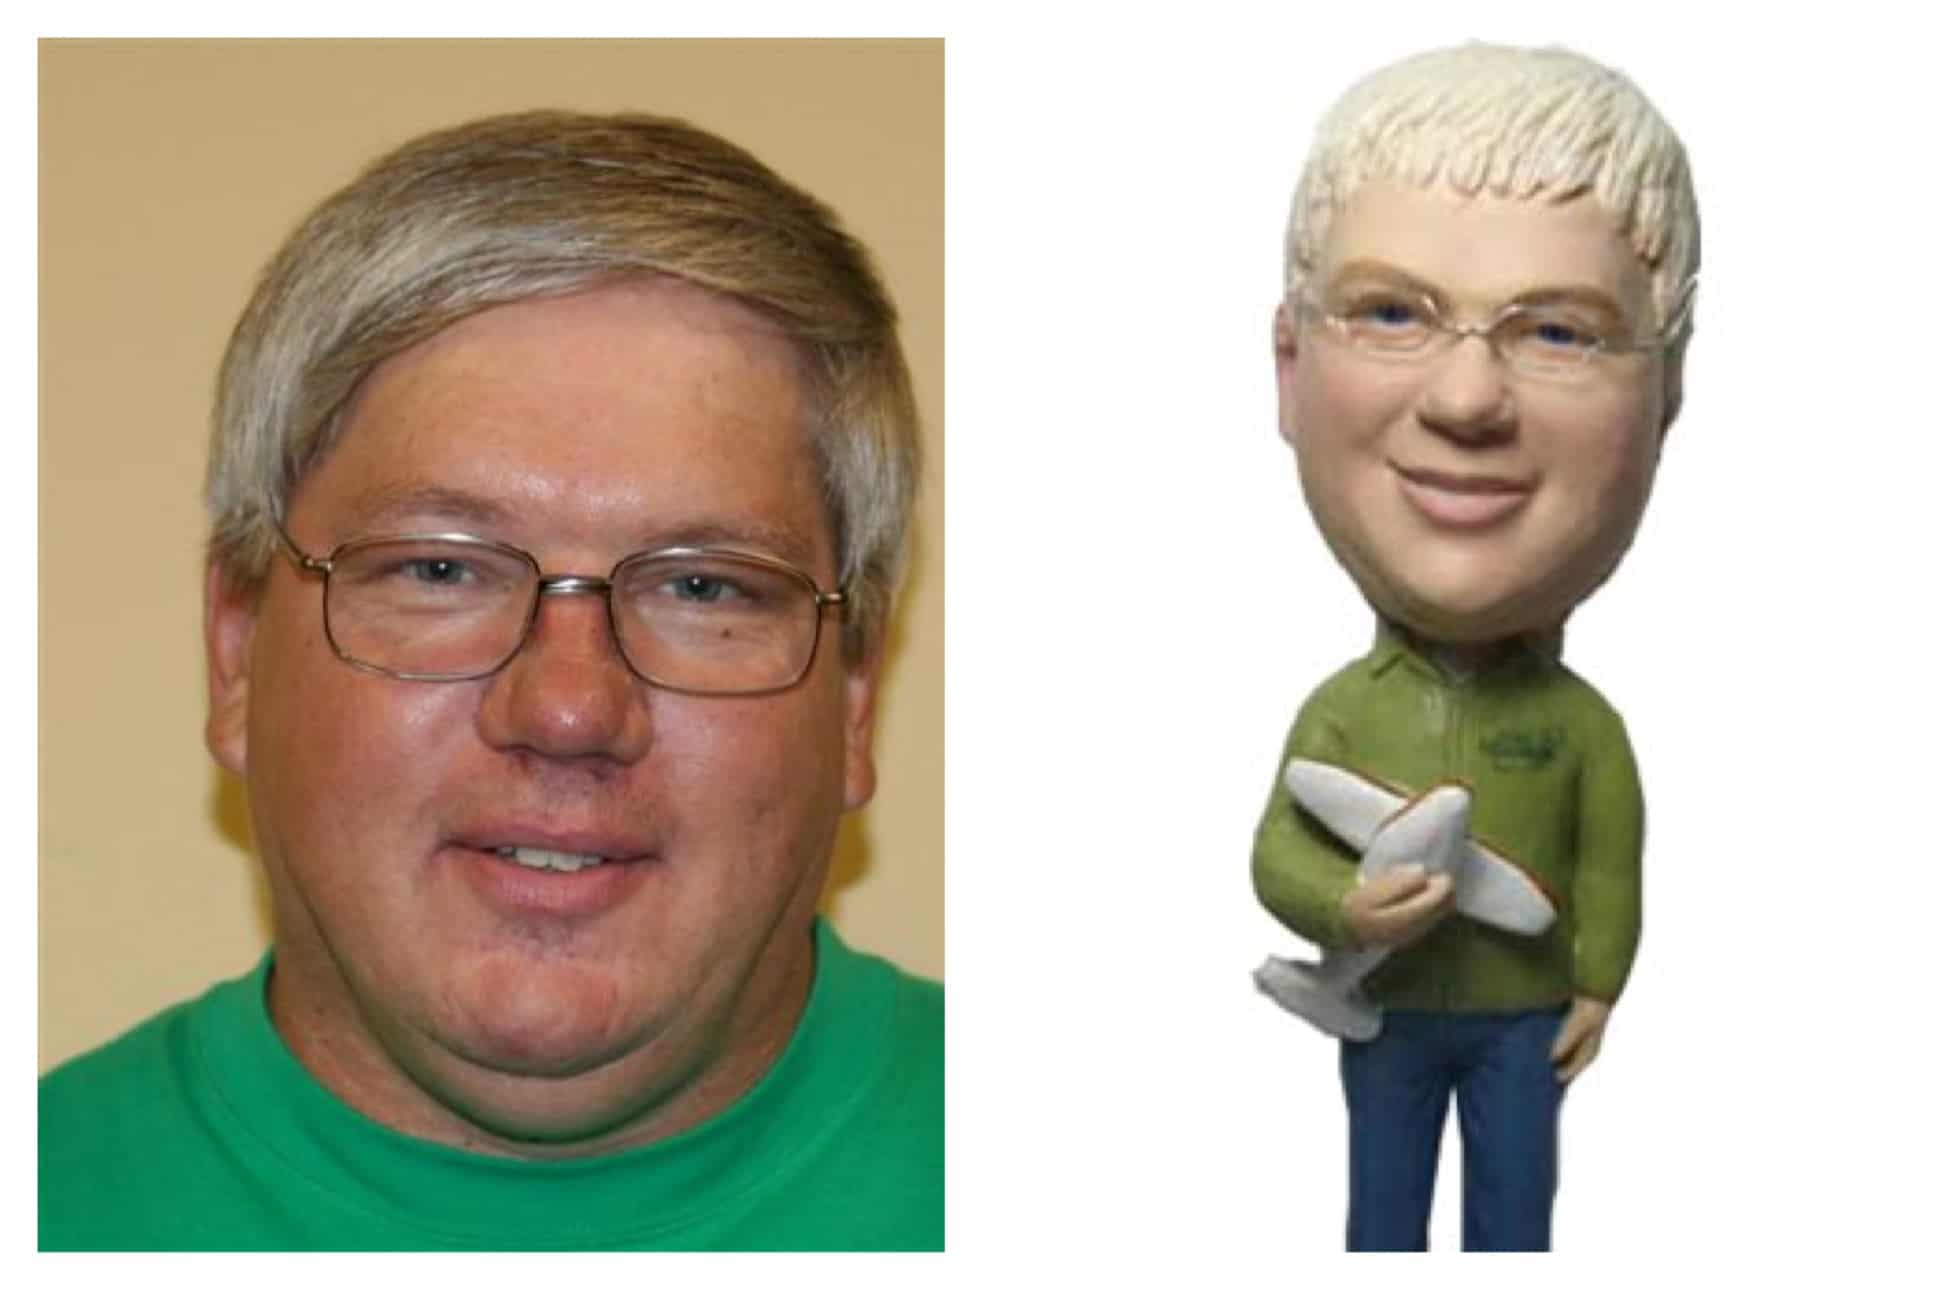 Bill and his customized bobblehead for 5 year anniversaries